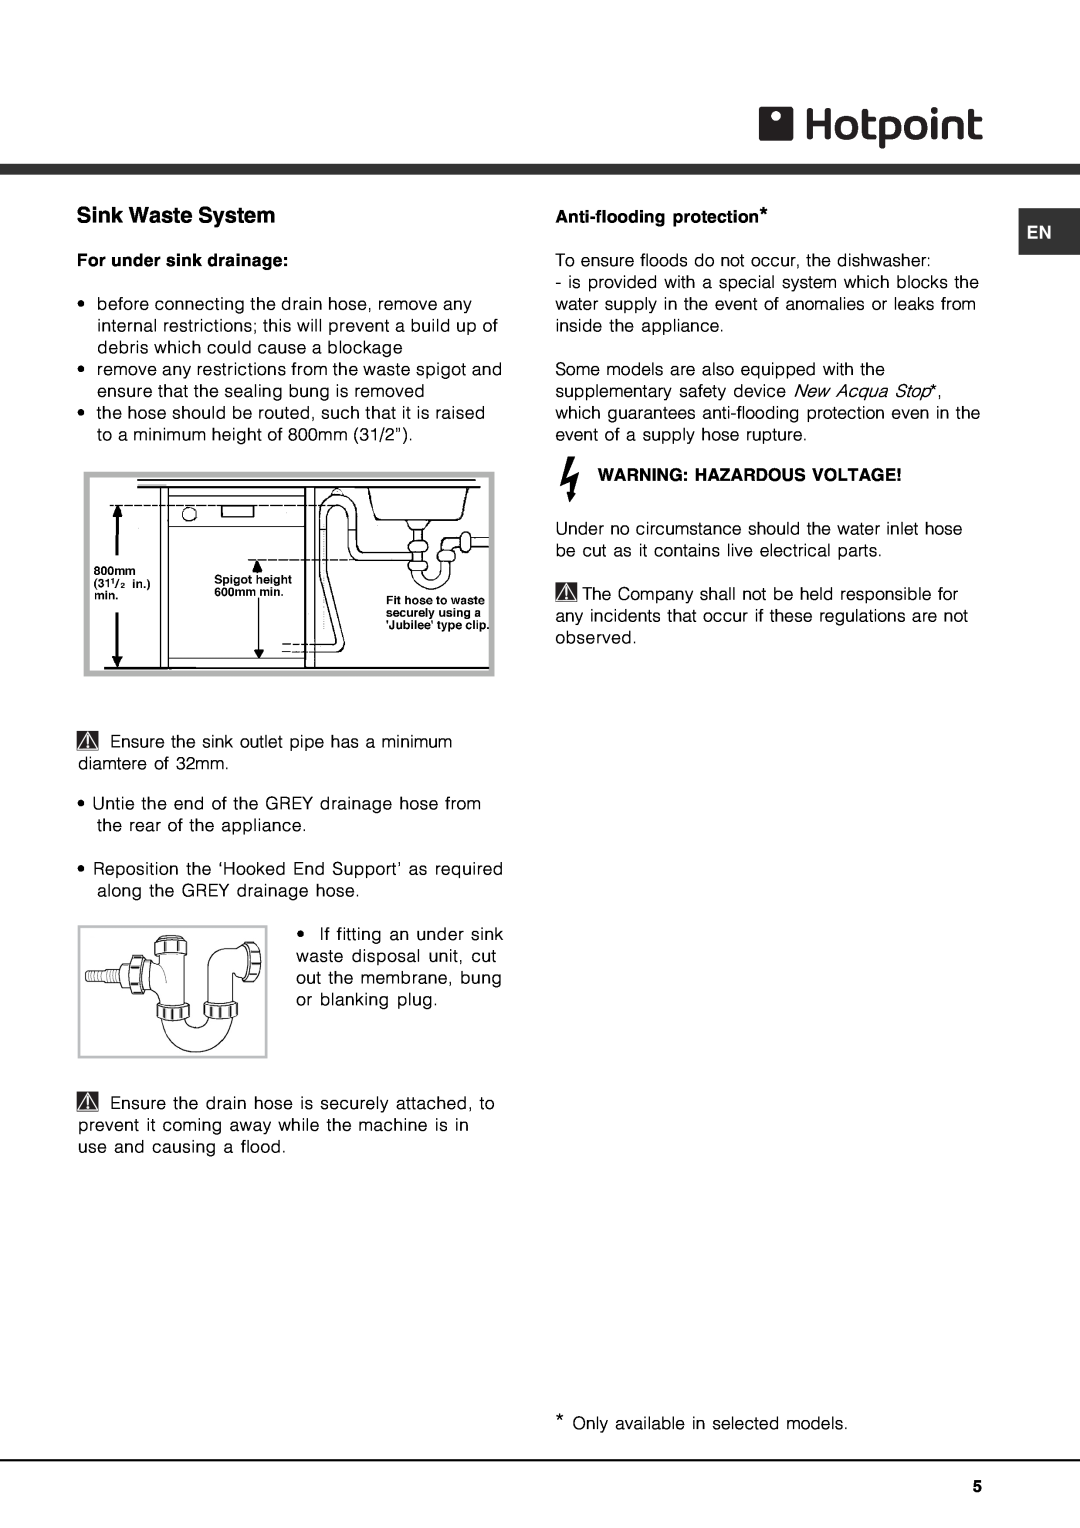 Hotpoint FDF-780 manual Sink Waste System 